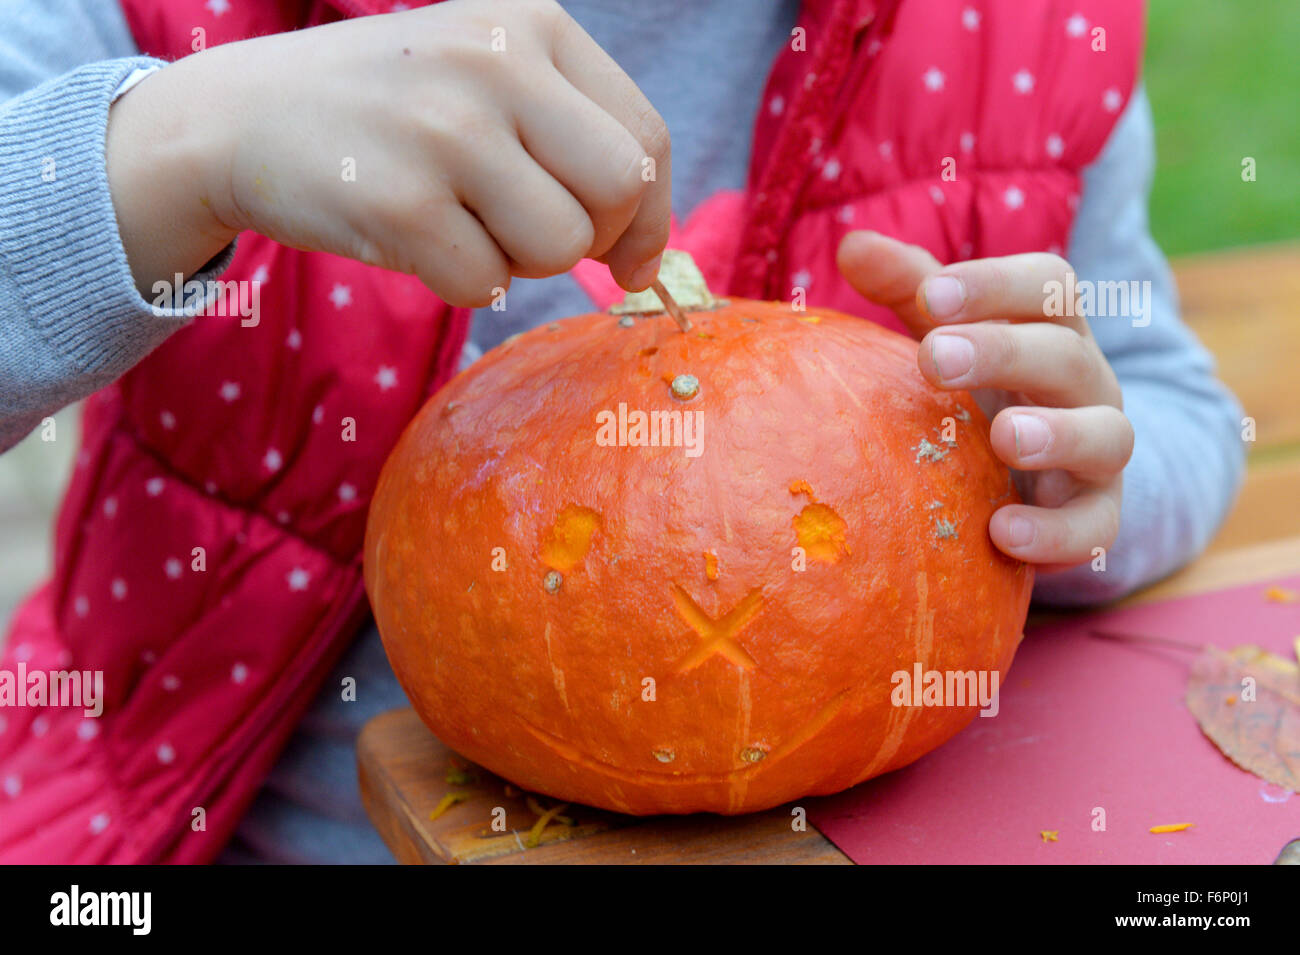 A girl is scratching a face into a pumpkin. Stock Photo